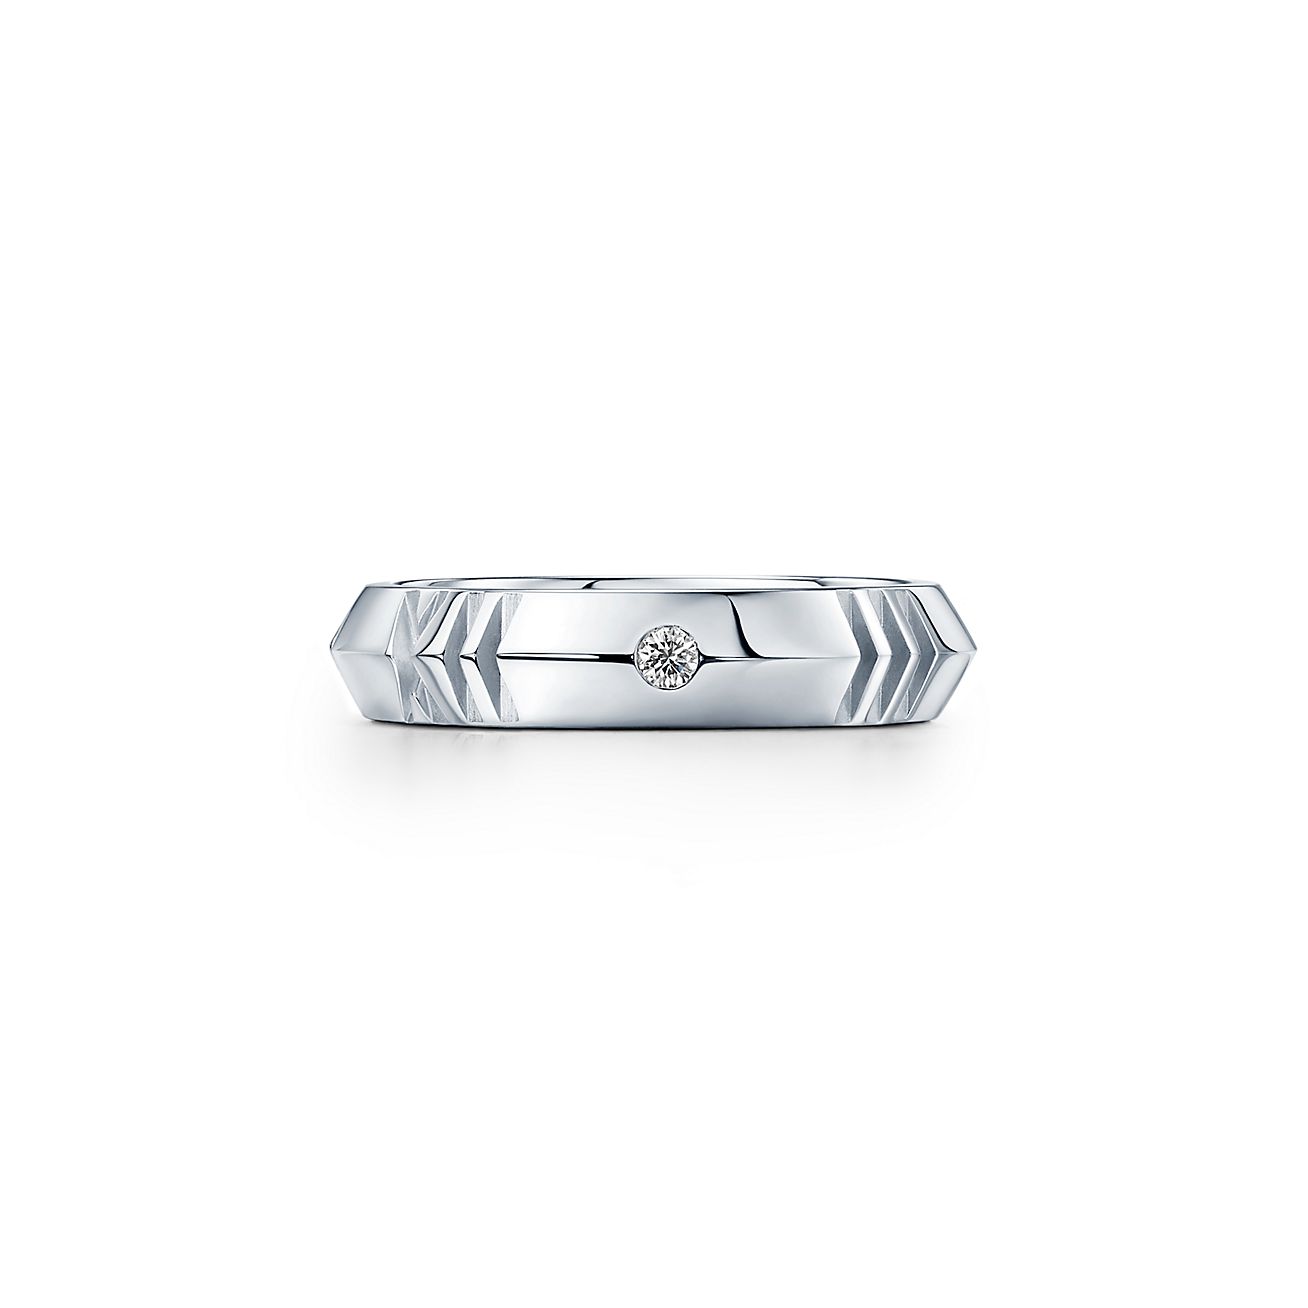 Atlas™ X Closed Narrow Ring in White Gold with Diamonds, 4.5 mm 